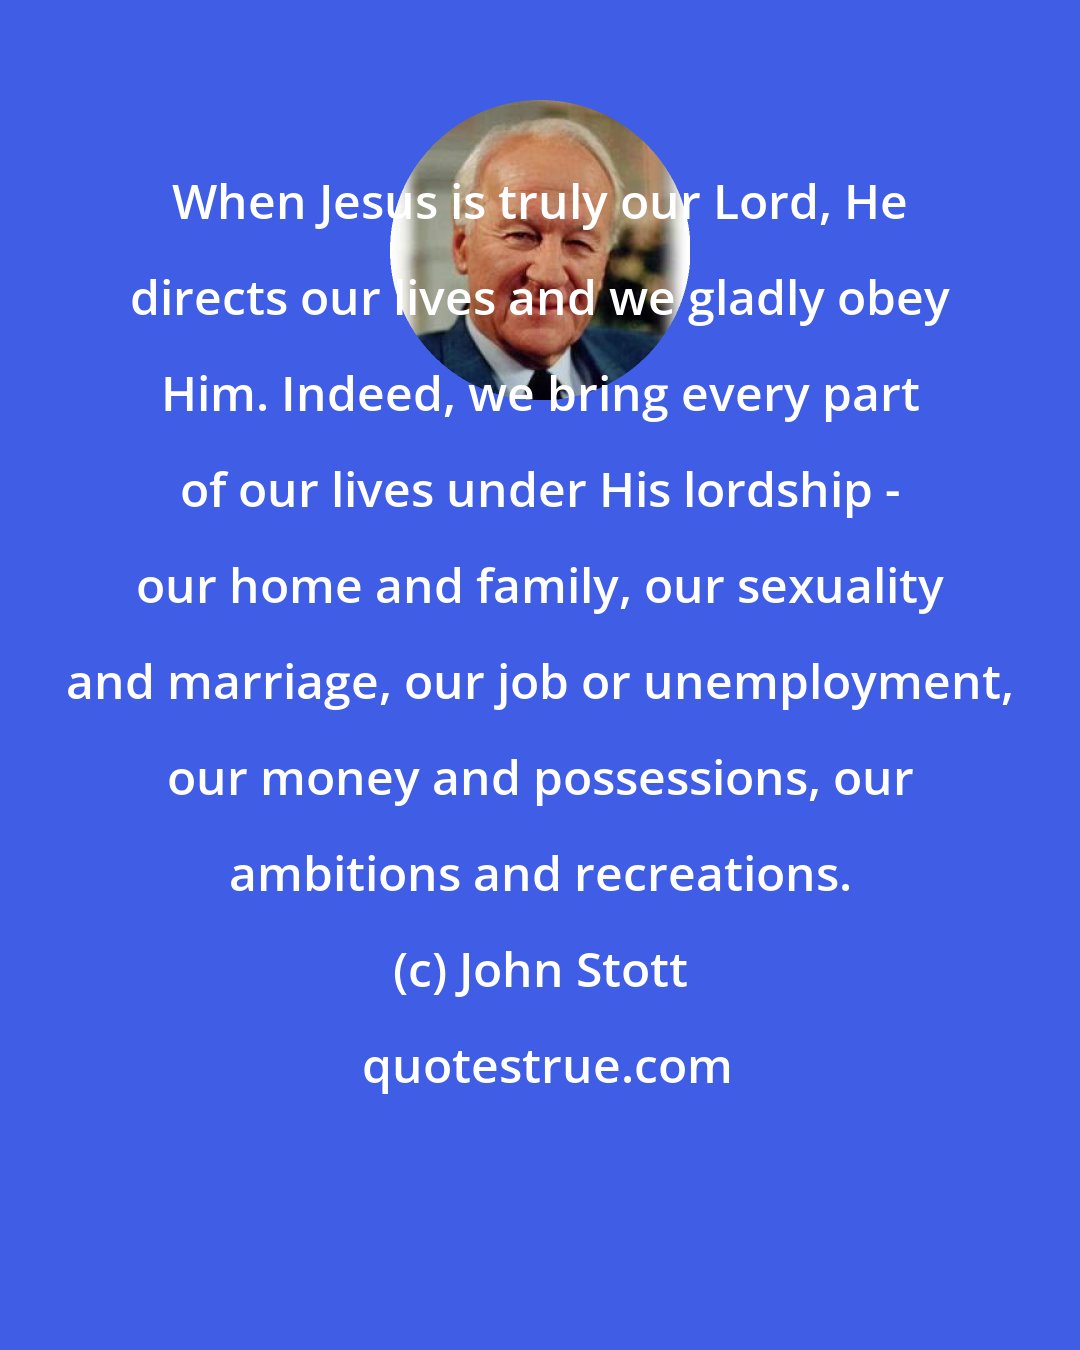 John Stott: When Jesus is truly our Lord, He directs our lives and we gladly obey Him. Indeed, we bring every part of our lives under His lordship - our home and family, our sexuality and marriage, our job or unemployment, our money and possessions, our ambitions and recreations.